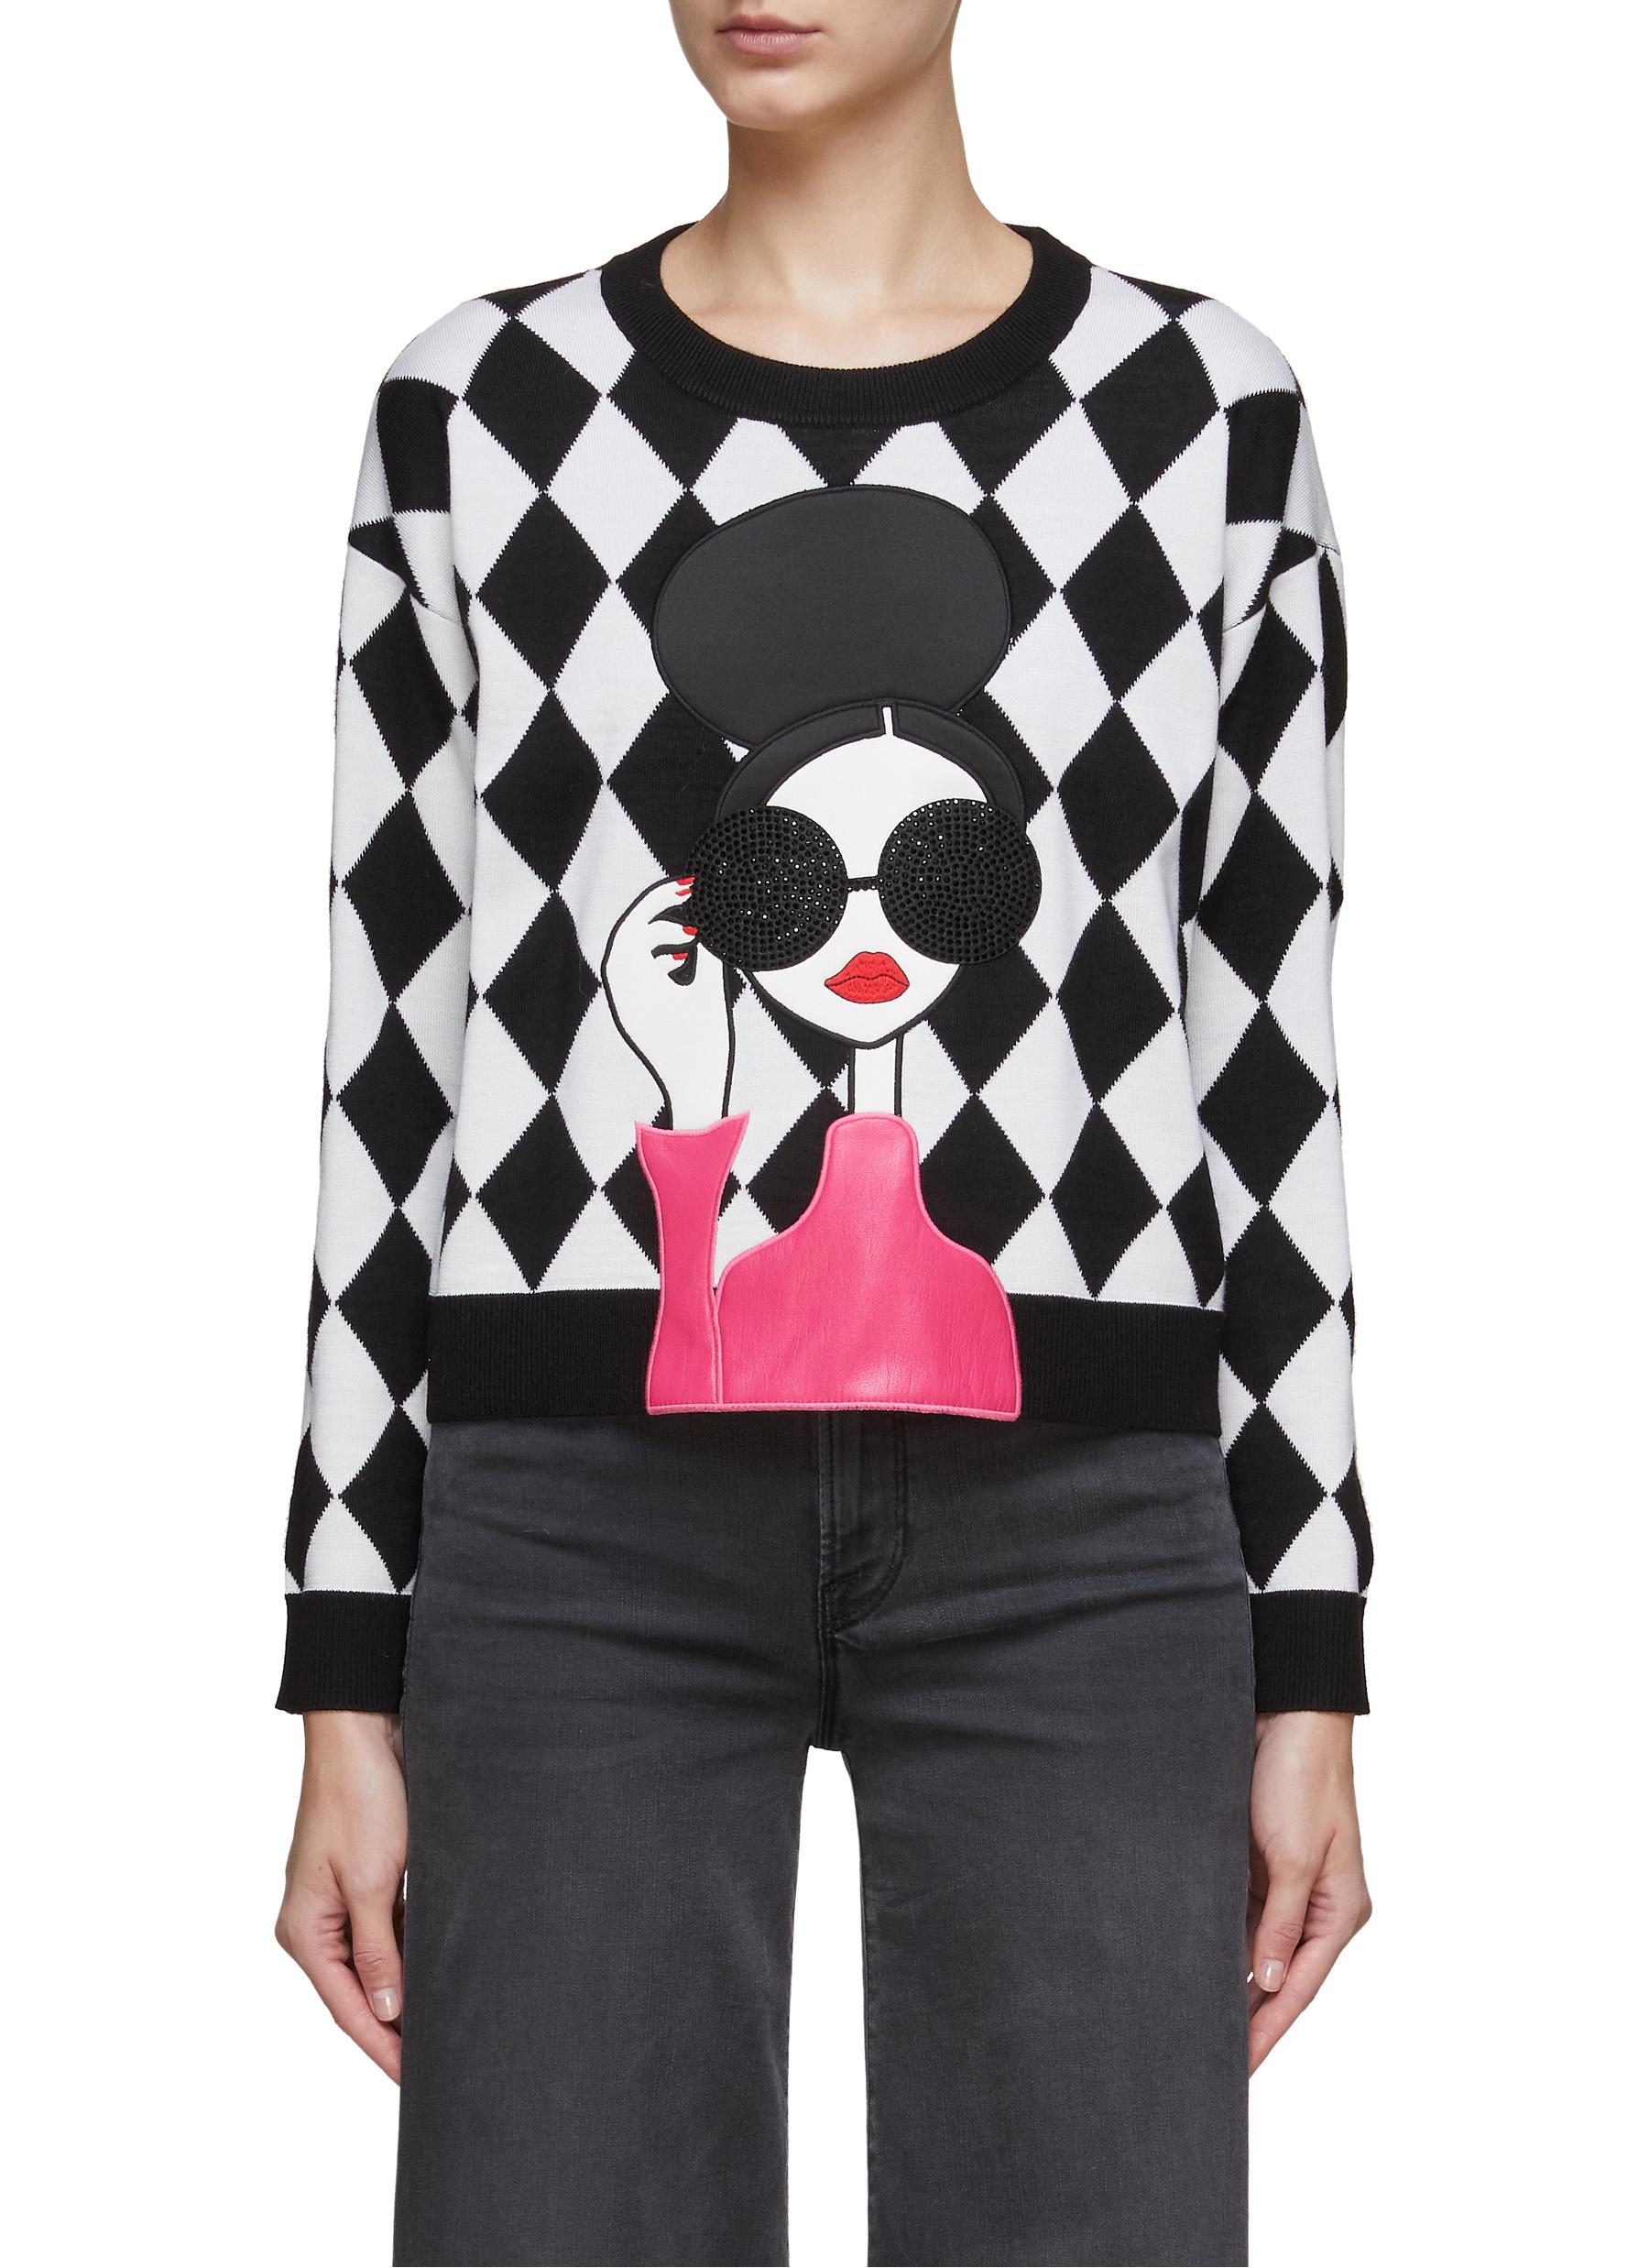 ALICE + OLIVIA | 'GLEESON' APPLIQUE STACE LONG SLEEVE PULLOVER